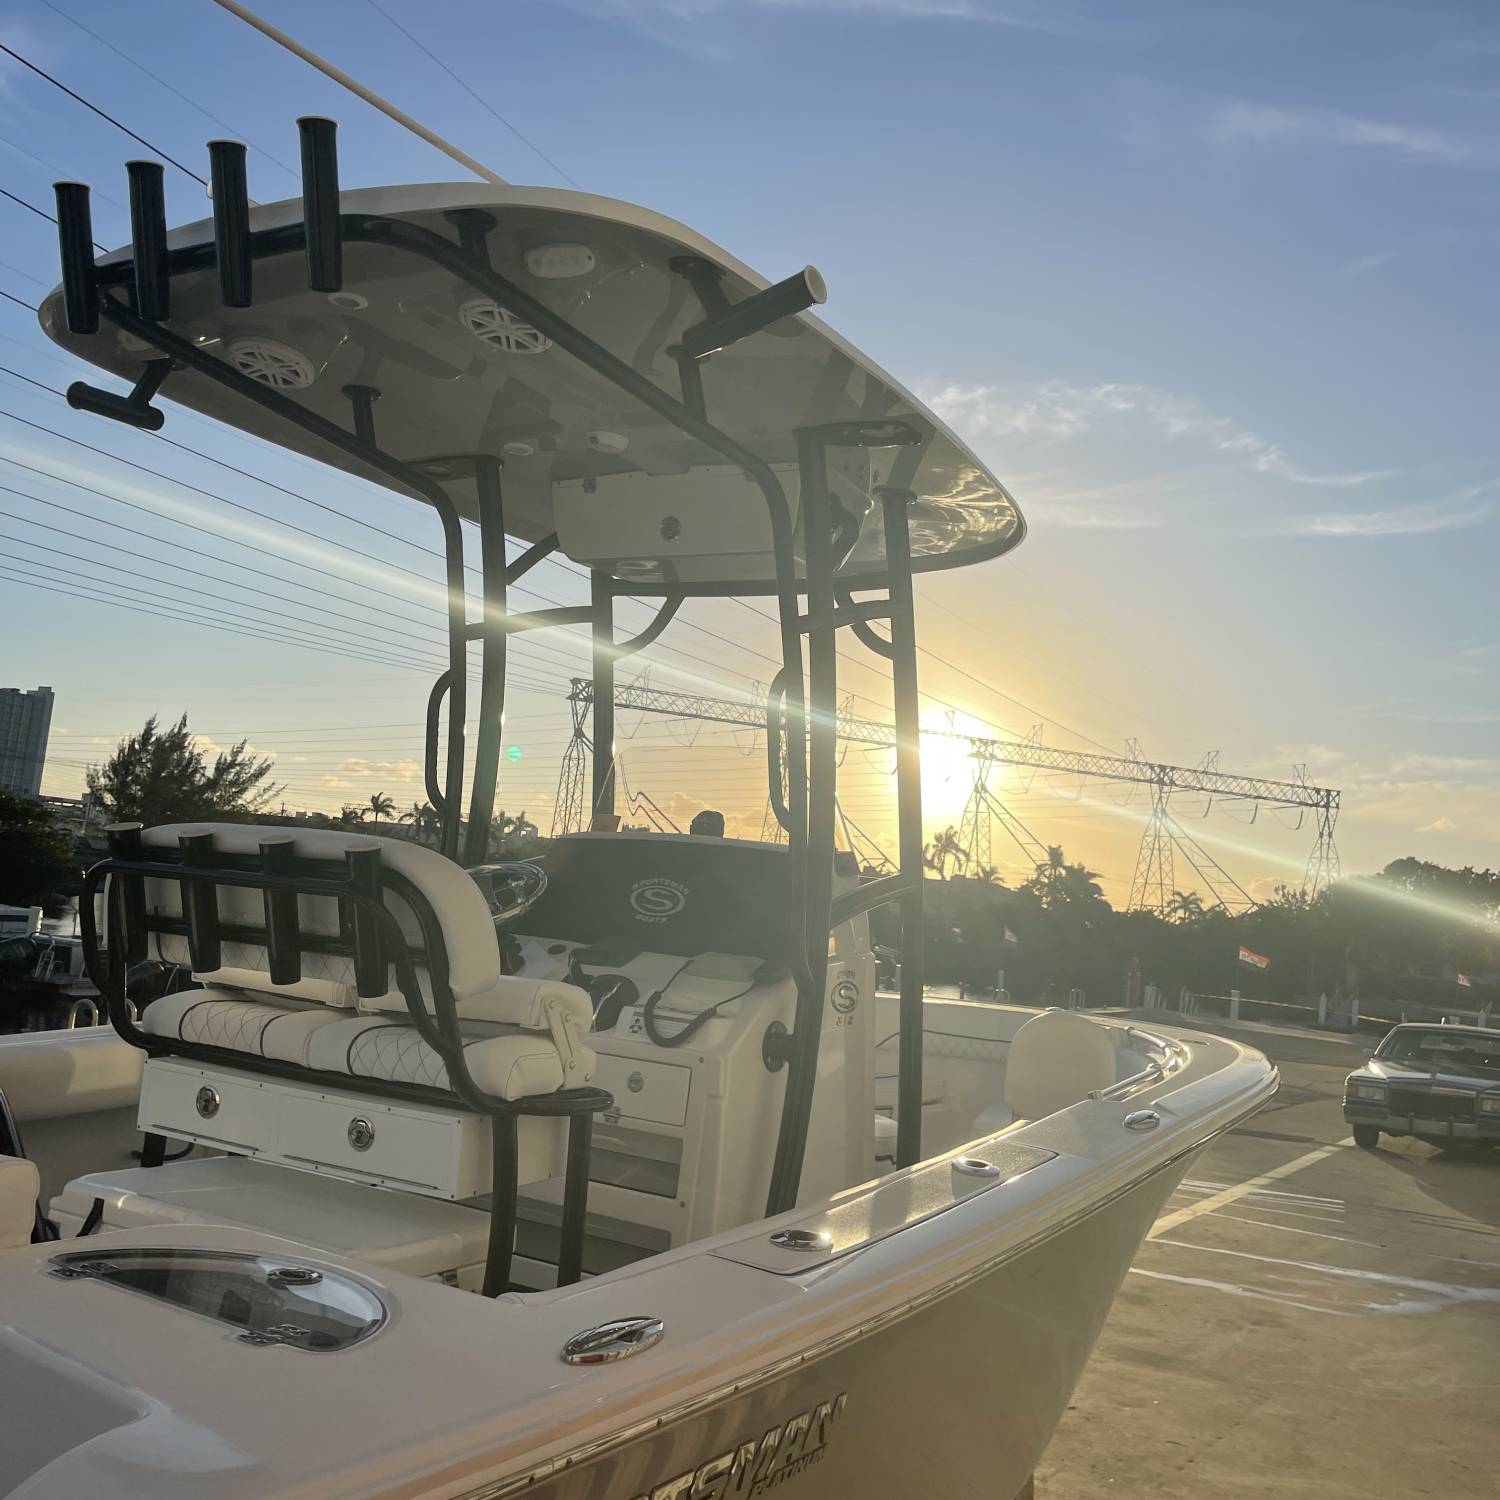 Title: Done for the day - On board their Sportsman Open 212 Center Console - Location: Thunderboat Marine Center. Participating in the Photo Contest #SportsmanApril